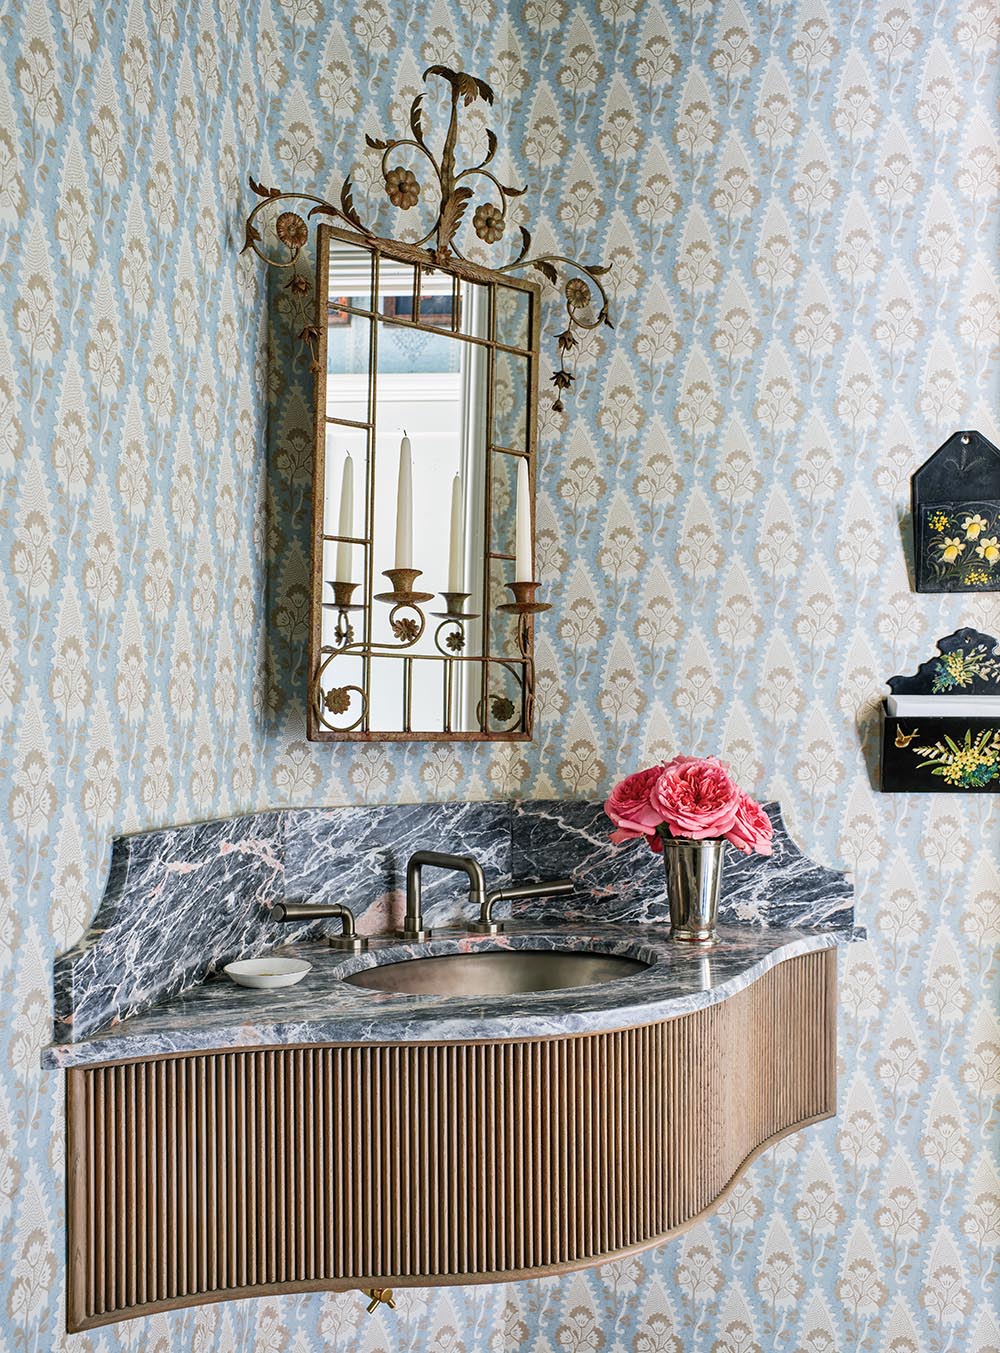 Wall-hung serpentine sink with marble top under gold, metal-framed mirror in powder room designed by Bunny Miller.